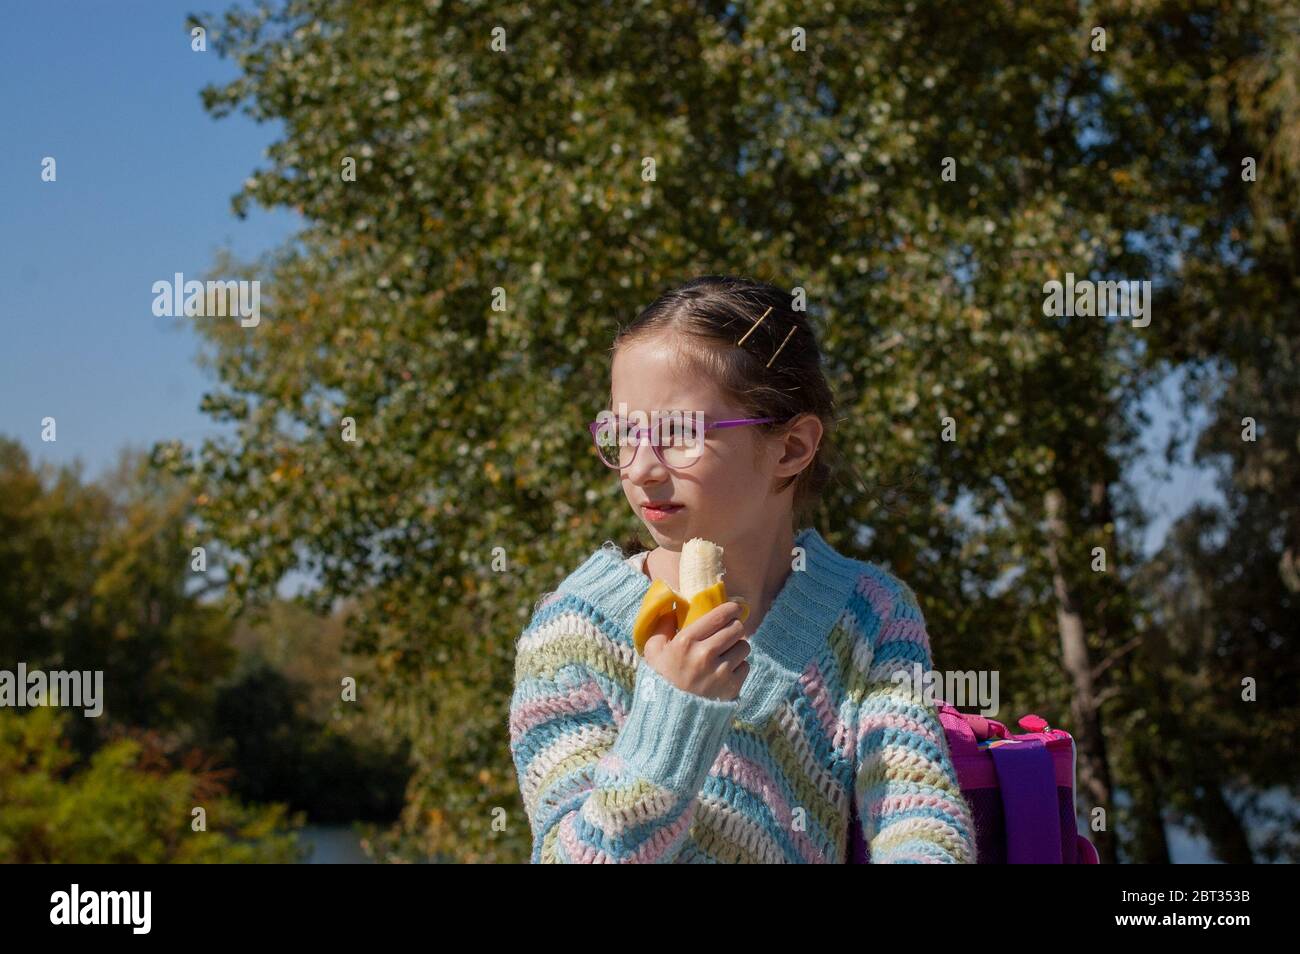 Schoolgirl eating a banana in the street. Alpha generation children will be the driving force behind progress in our century. They are more balanced, Stock Photo